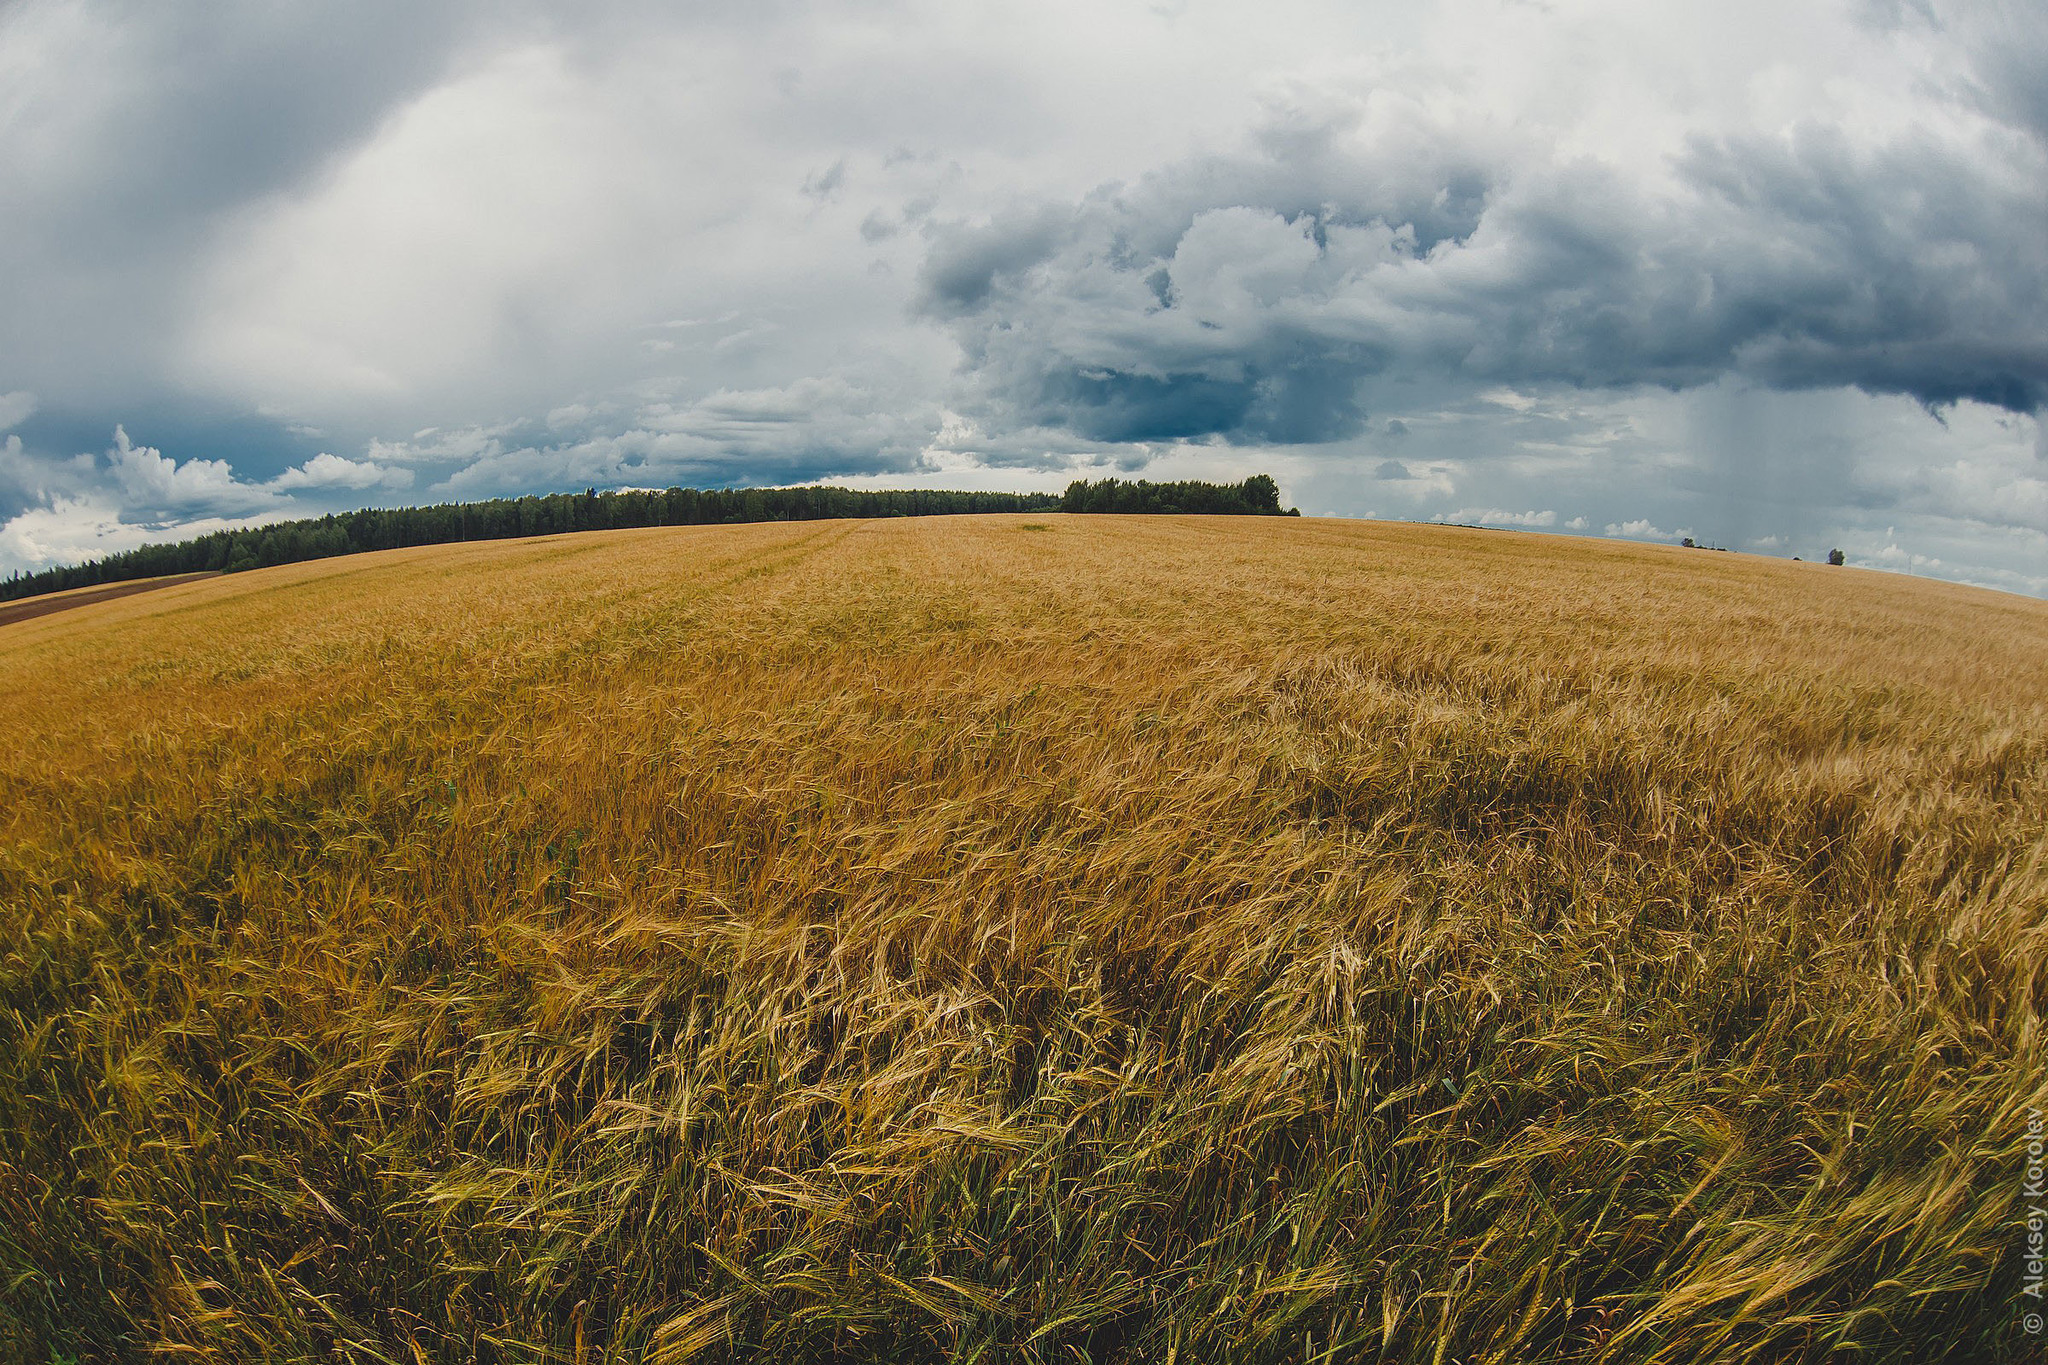 The rain is coming - My, Sky, Harvest, Weather, Field, The photo